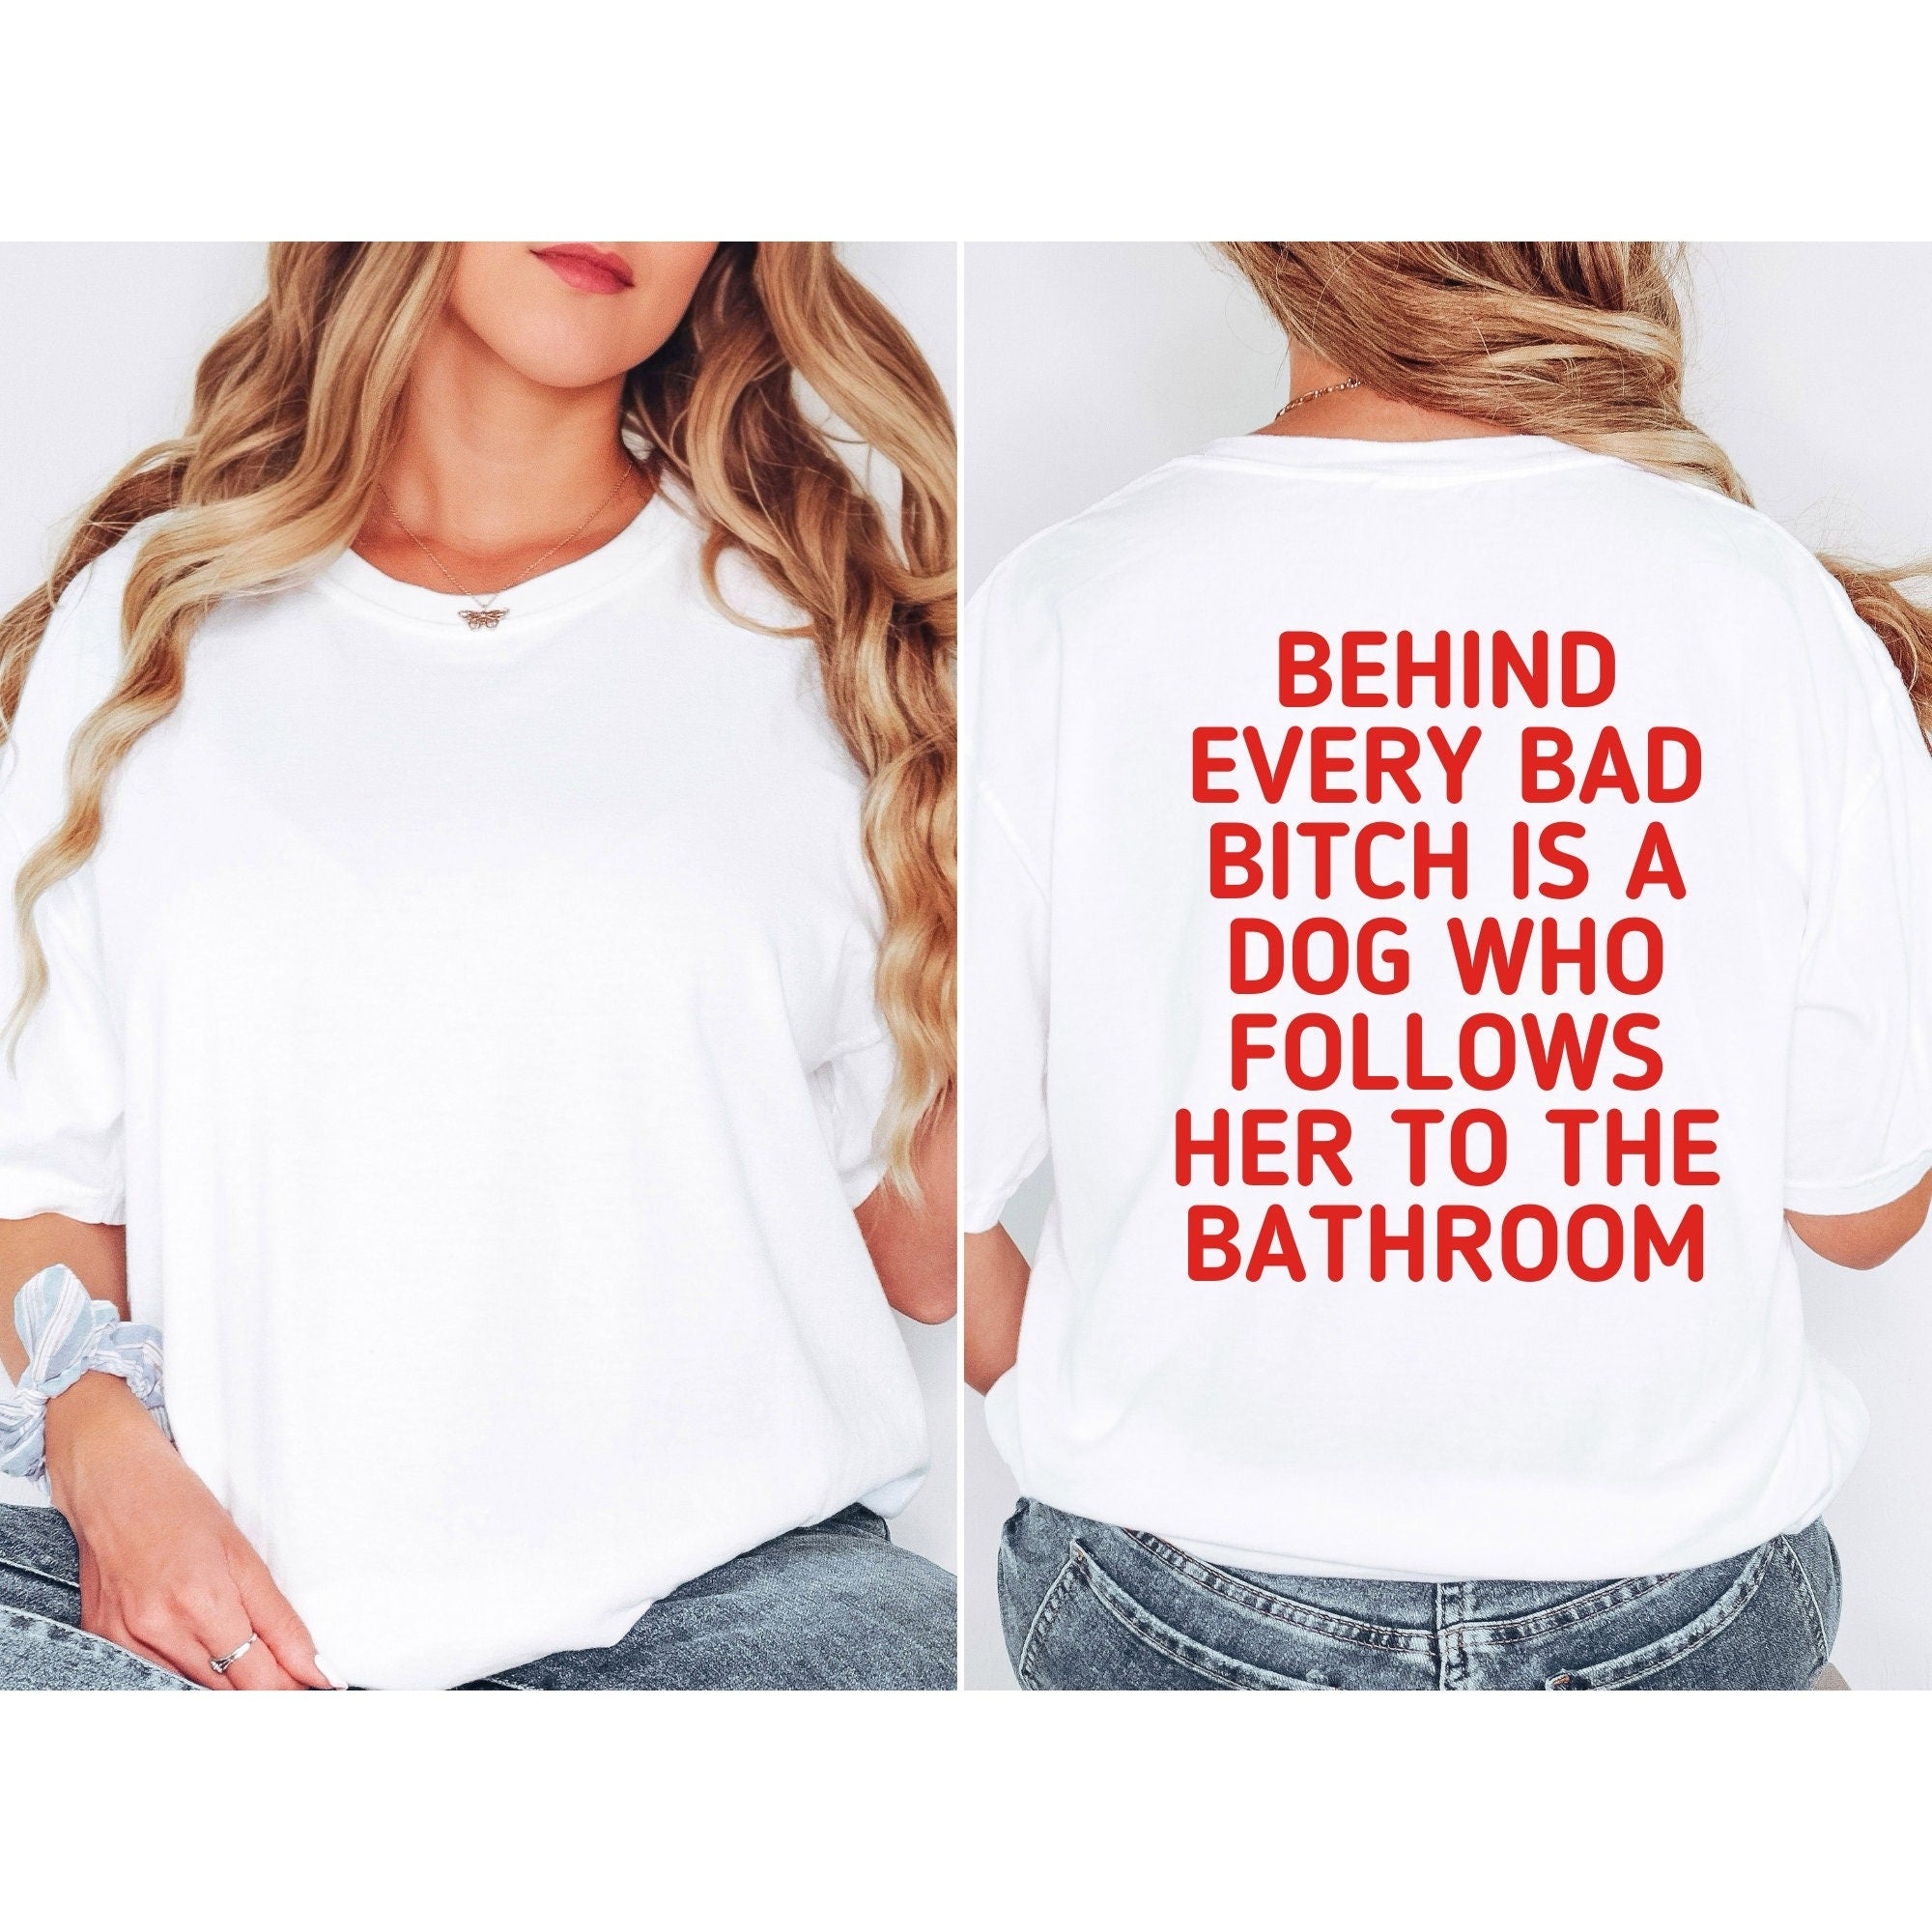 Behind Every Bad Bitch is a Dog Who Follows Women's T-Shirt